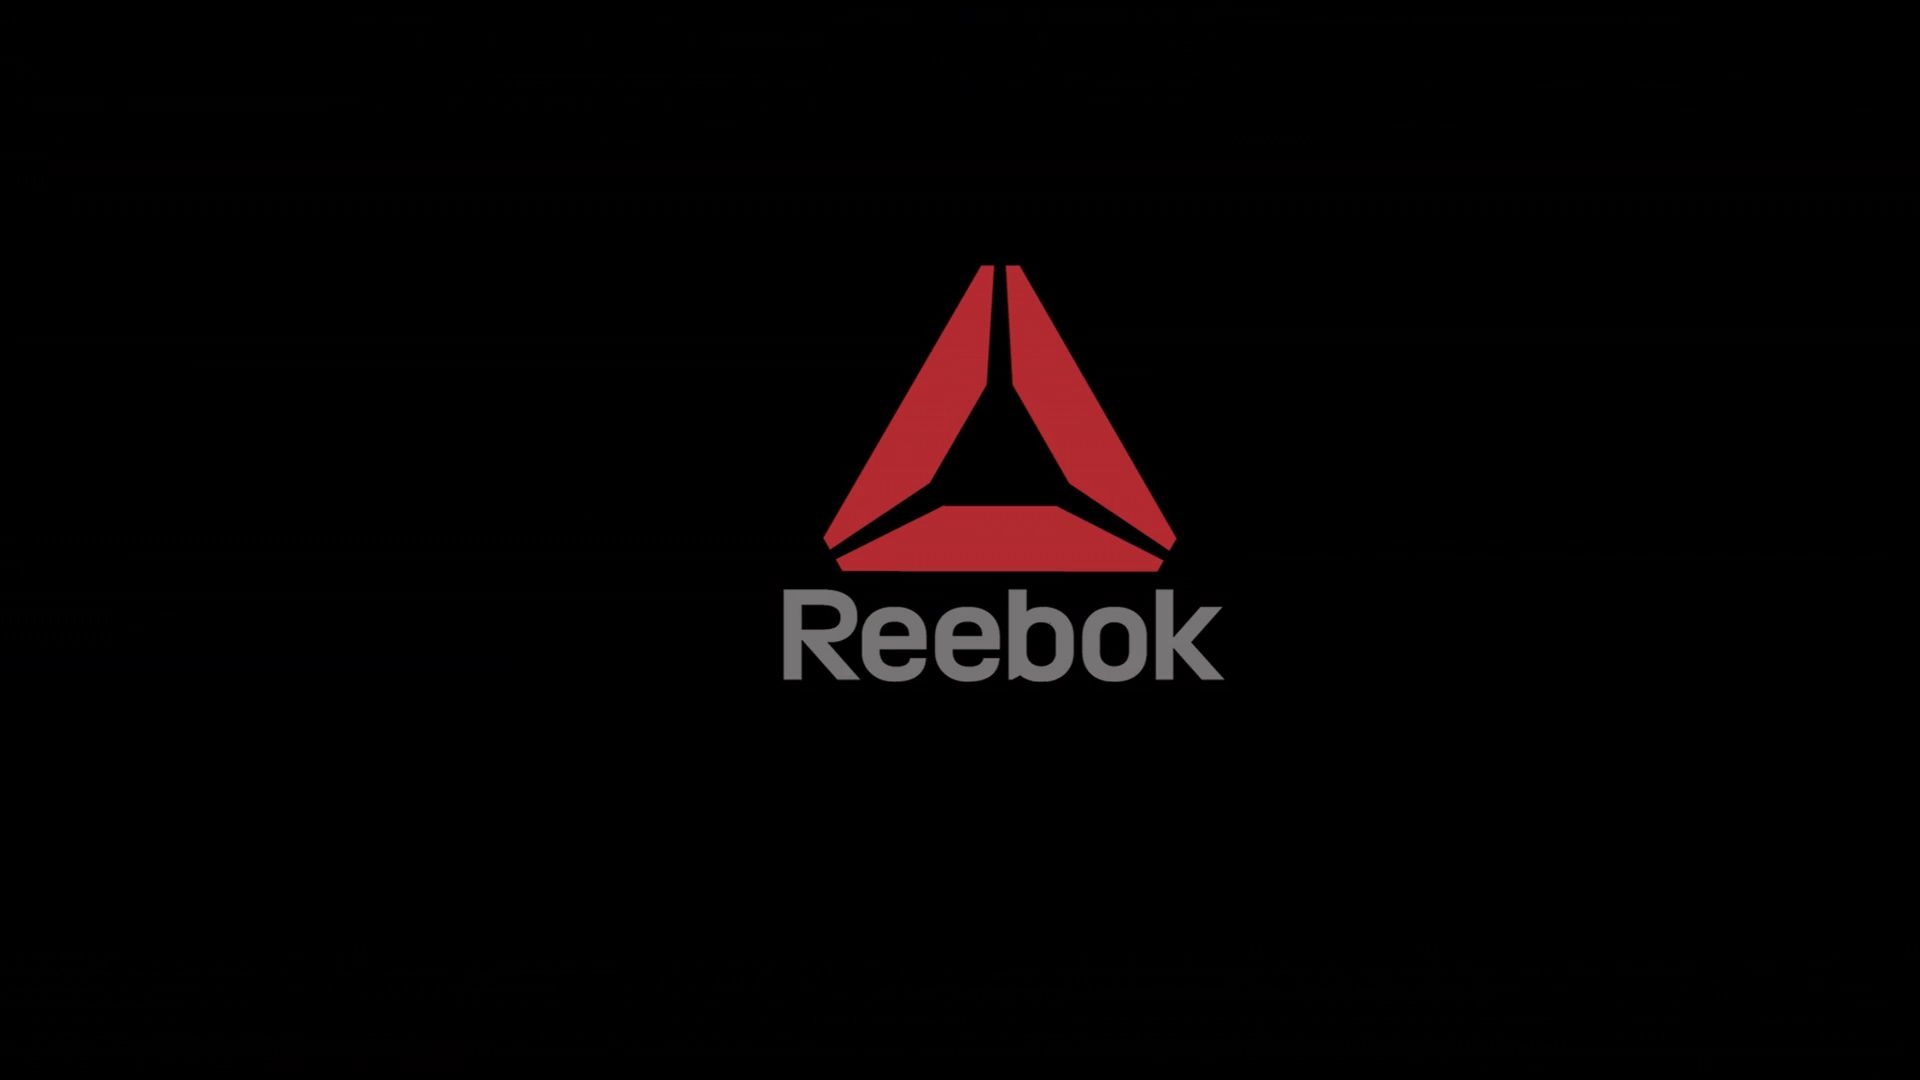 Reebok: Joe and Jeff Foster, The name meaning a grey rhebok, a type of antelope. 1920x1080 Full HD Wallpaper.